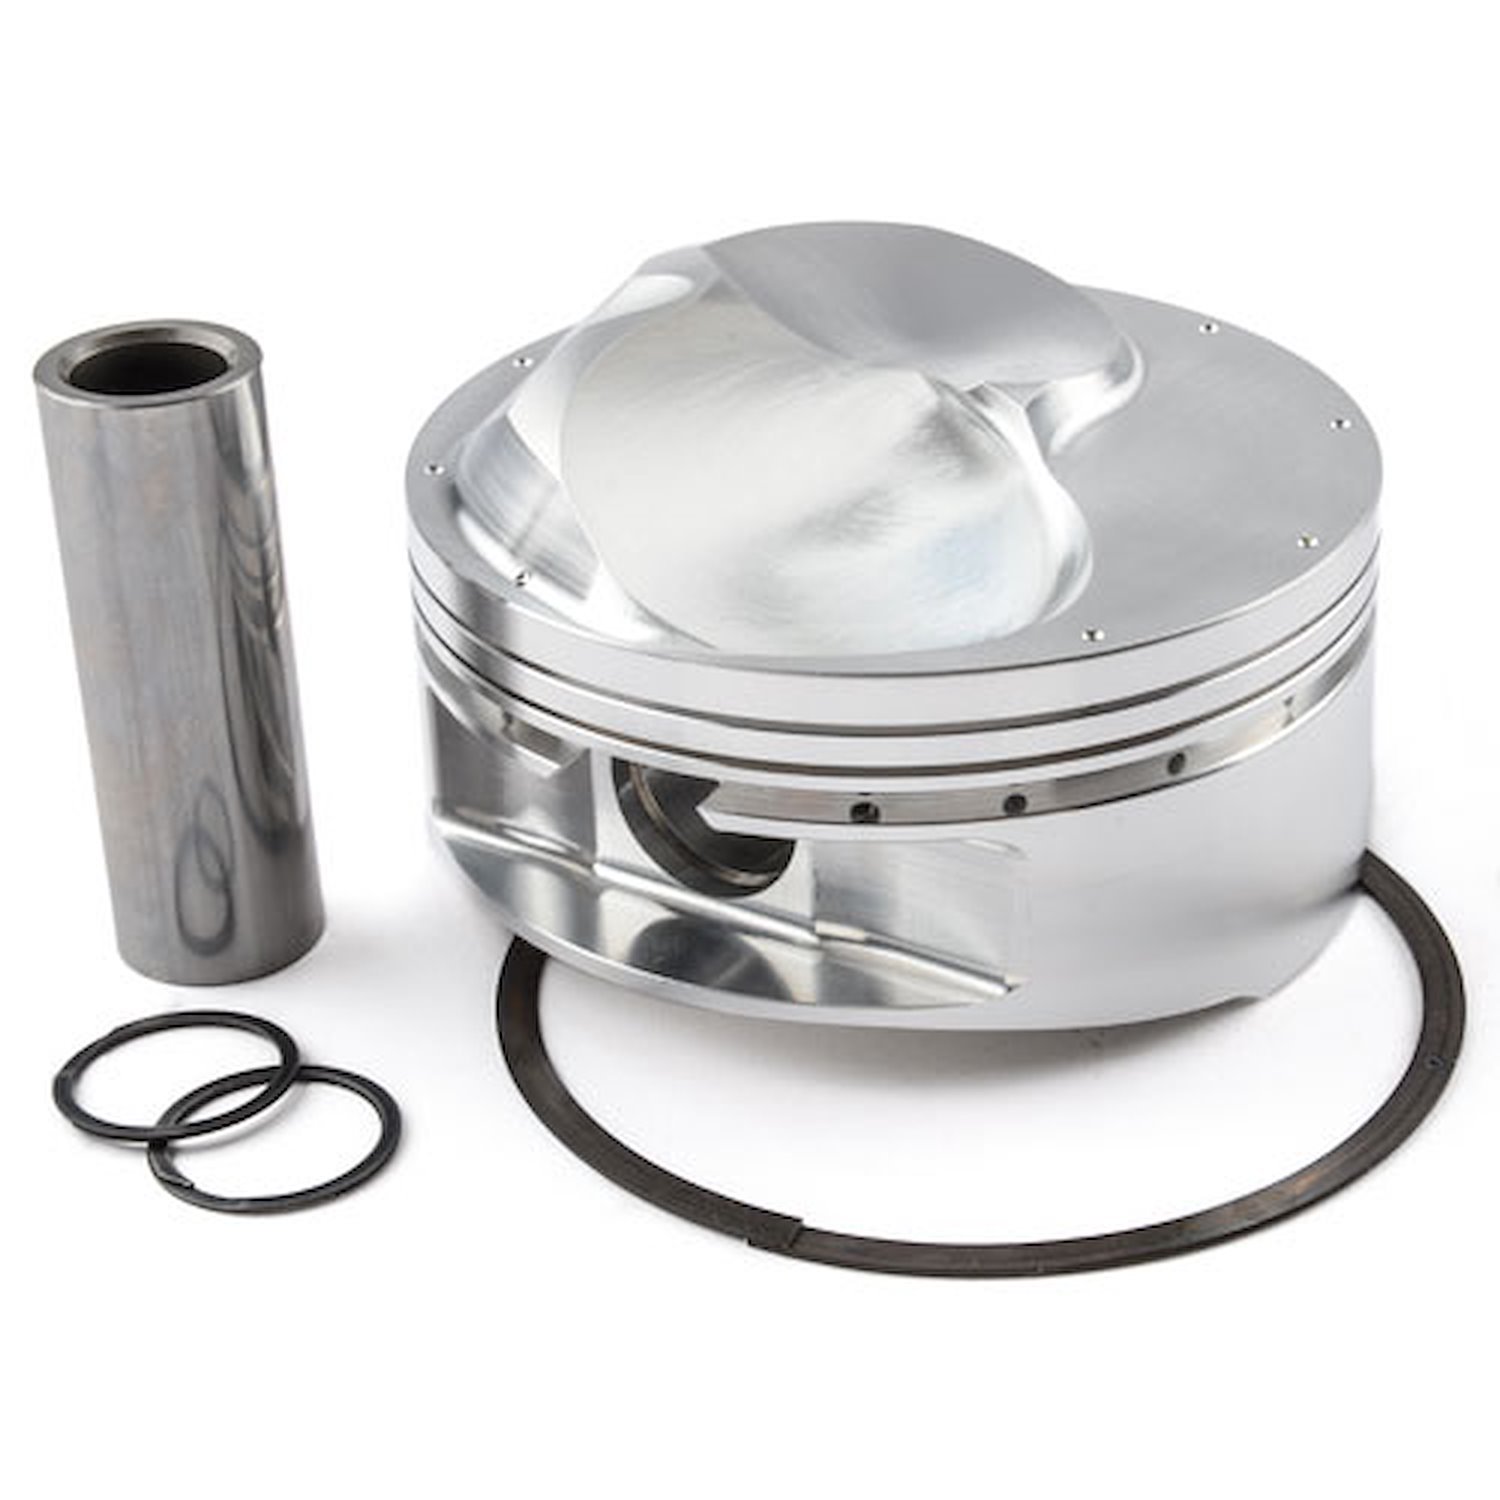 BB-Chevy Dome Pistons Bore 4.625